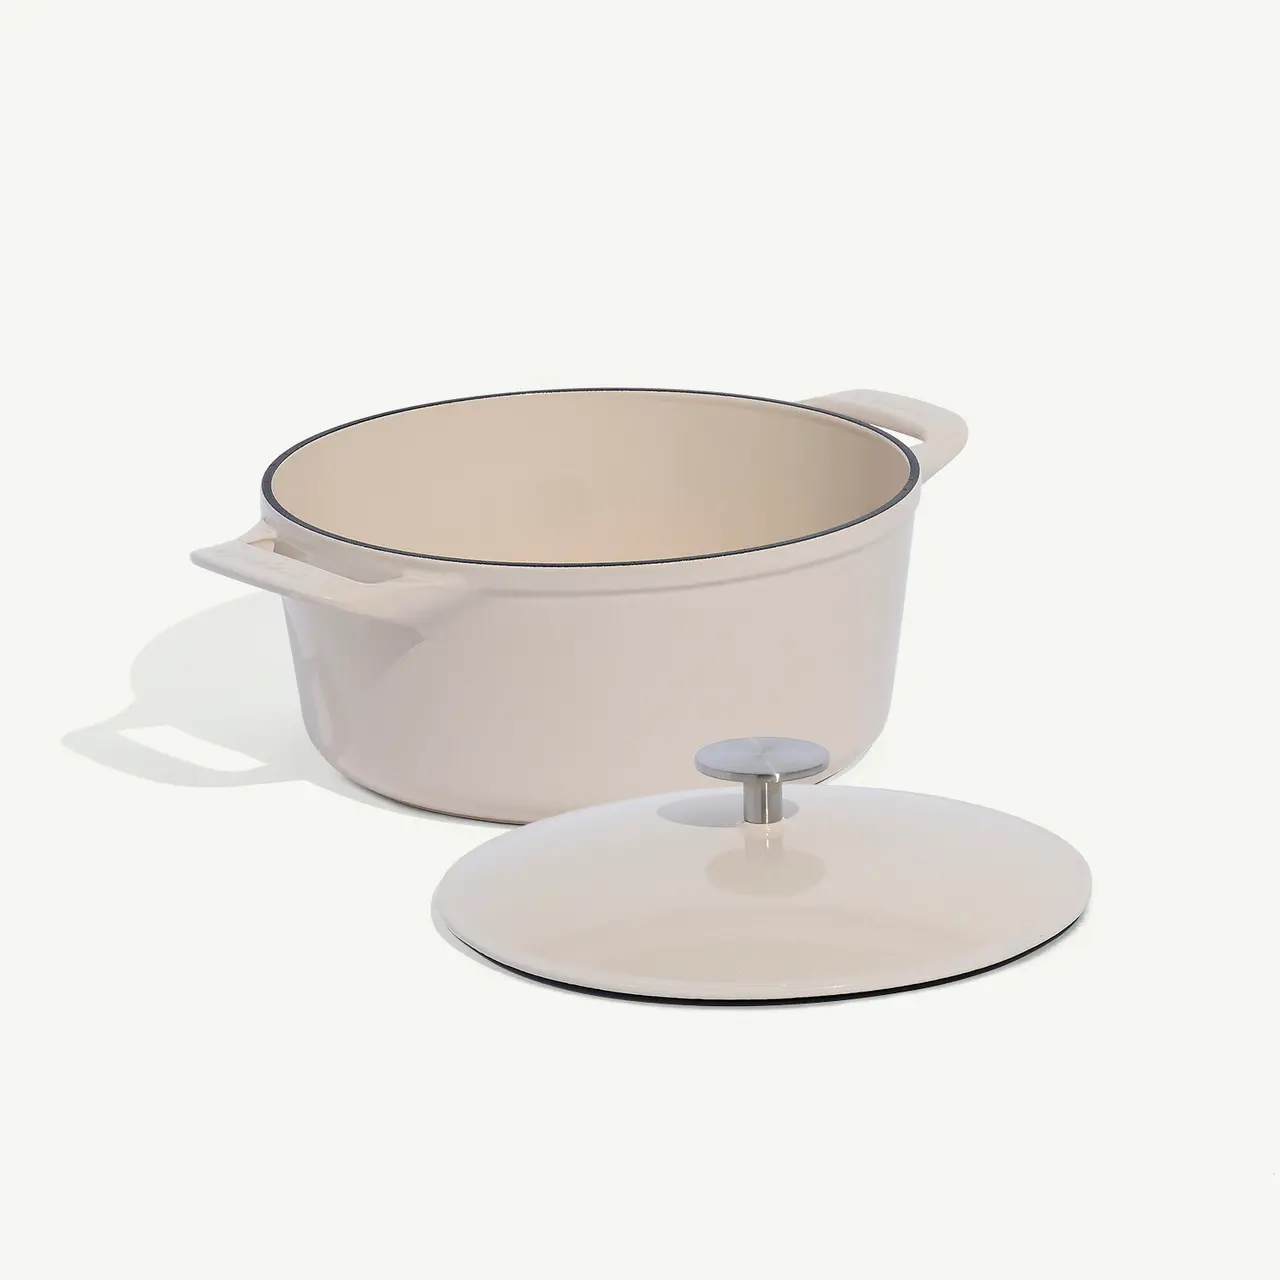 A beige cooking pot with handles and a lid off to the side on a white background.